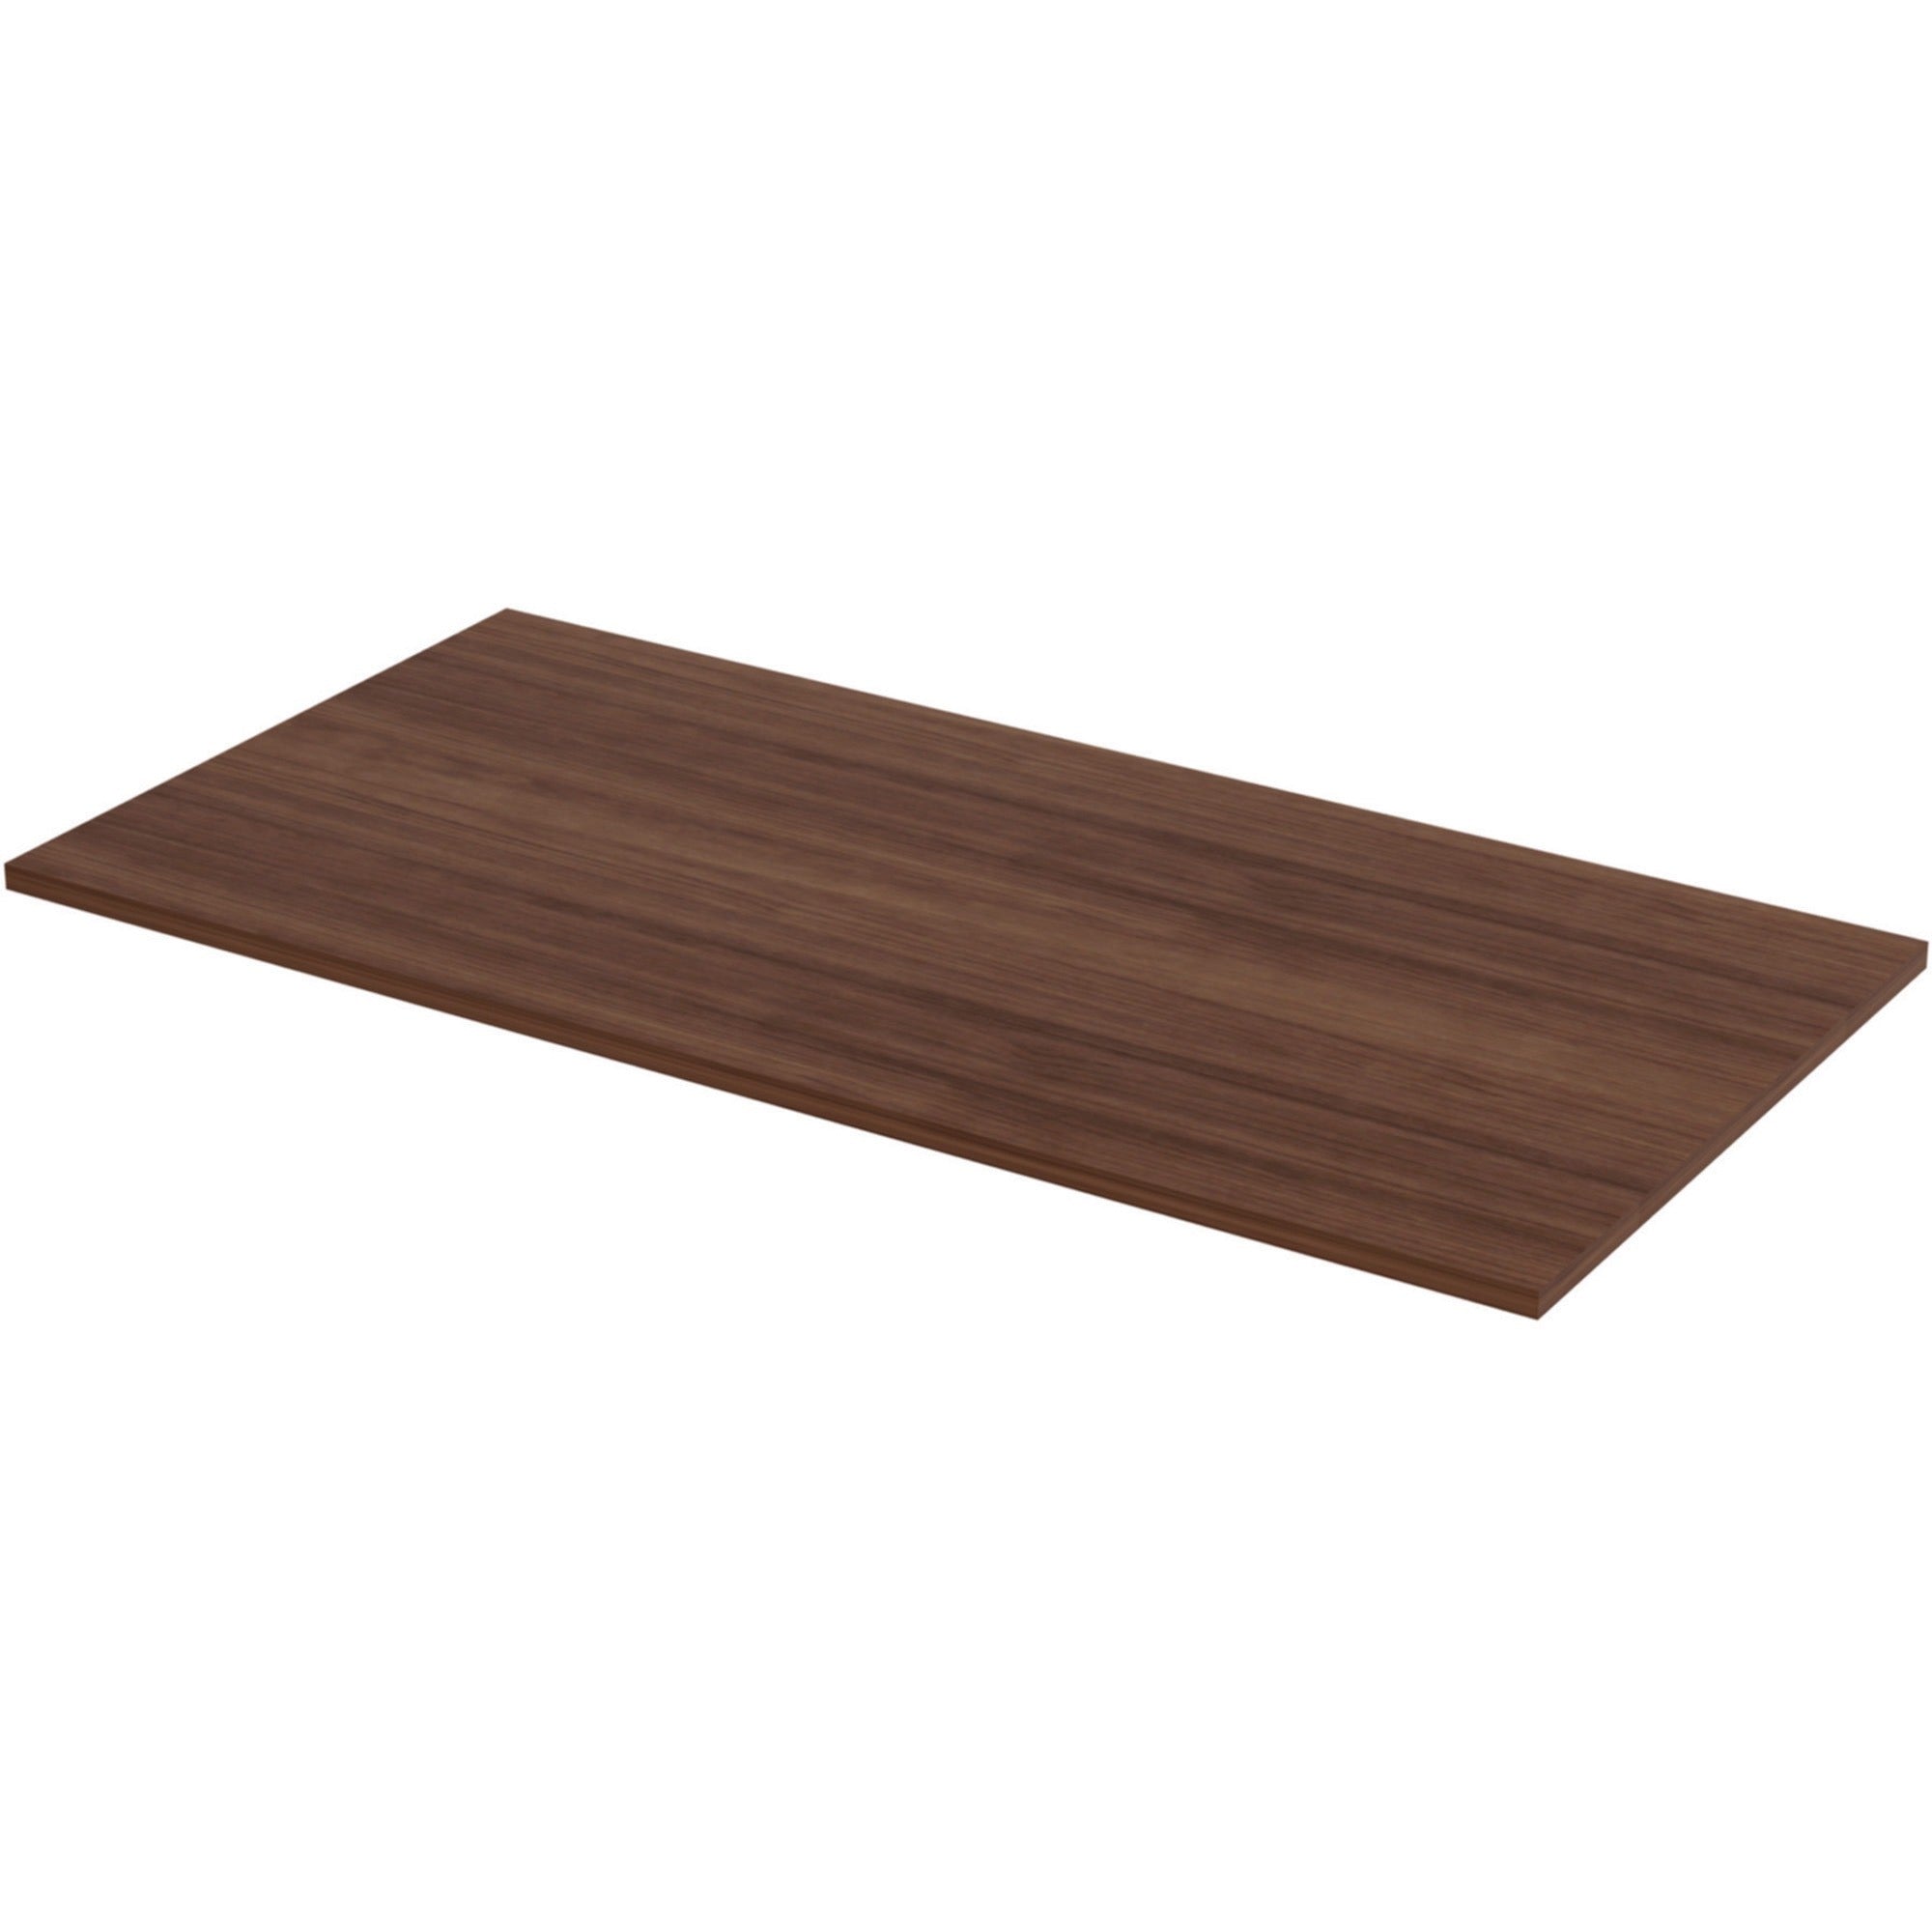 lorell-relevance-series-tabletop-for-table-topwalnut-rectangle-top-x-60-table-top-width-x-30-table-top-depth-x-1-table-top-thickness-assembly-required-1-each_llr16242 - 1